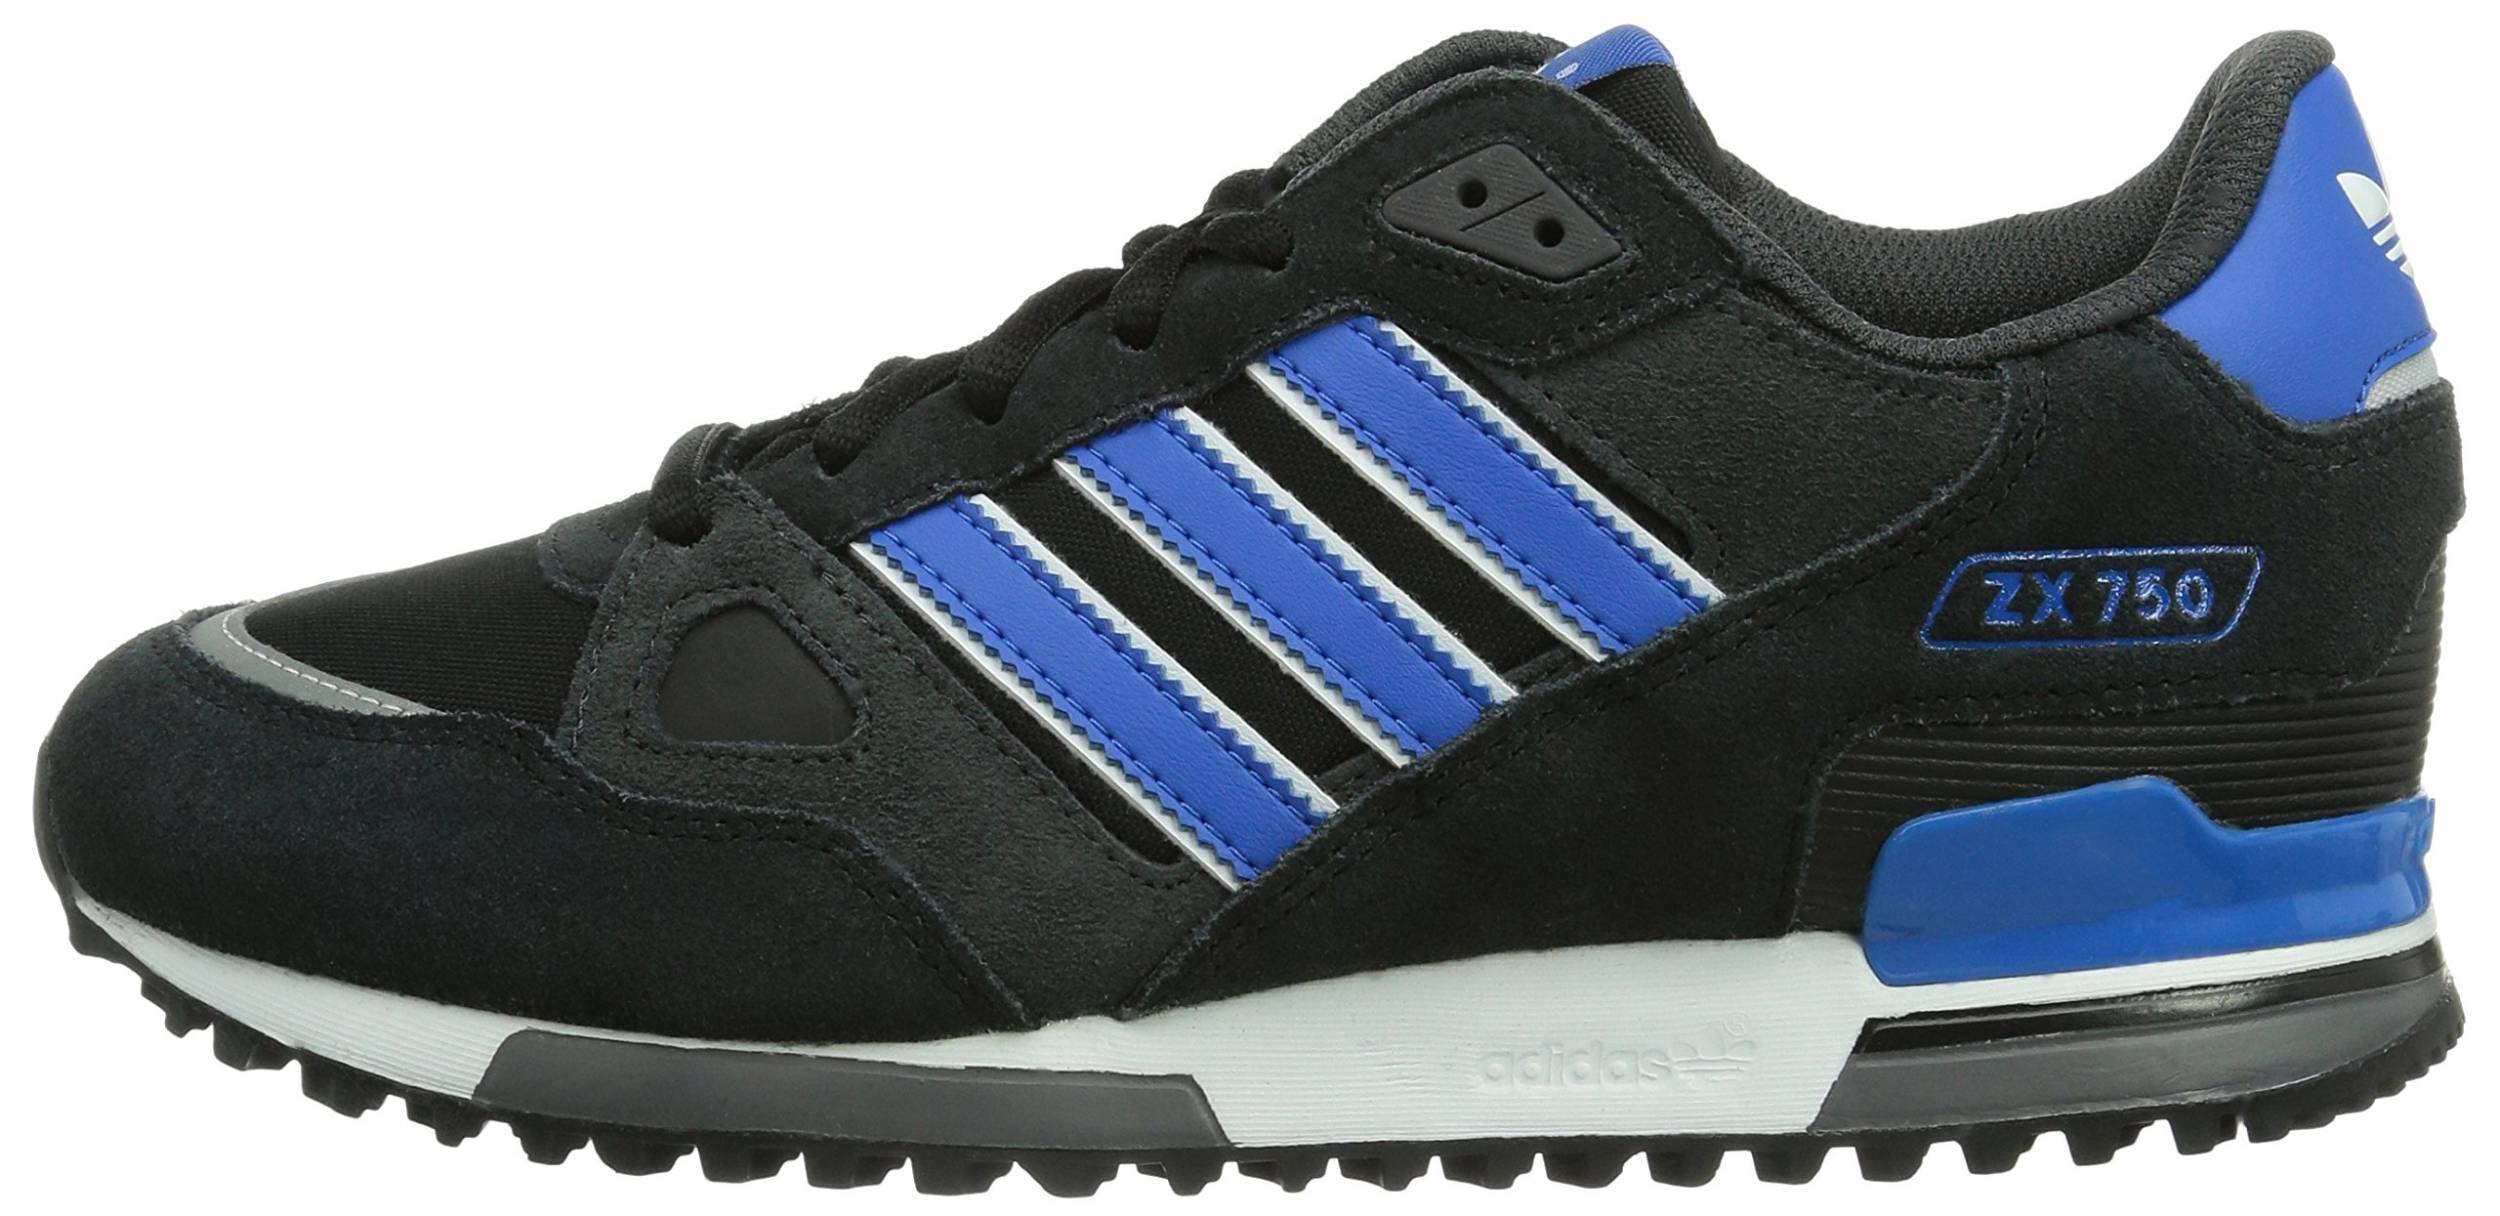 Beer uitlaat Trots Adidas ZX 750 Review, Facts, Comparison | RunRepeat